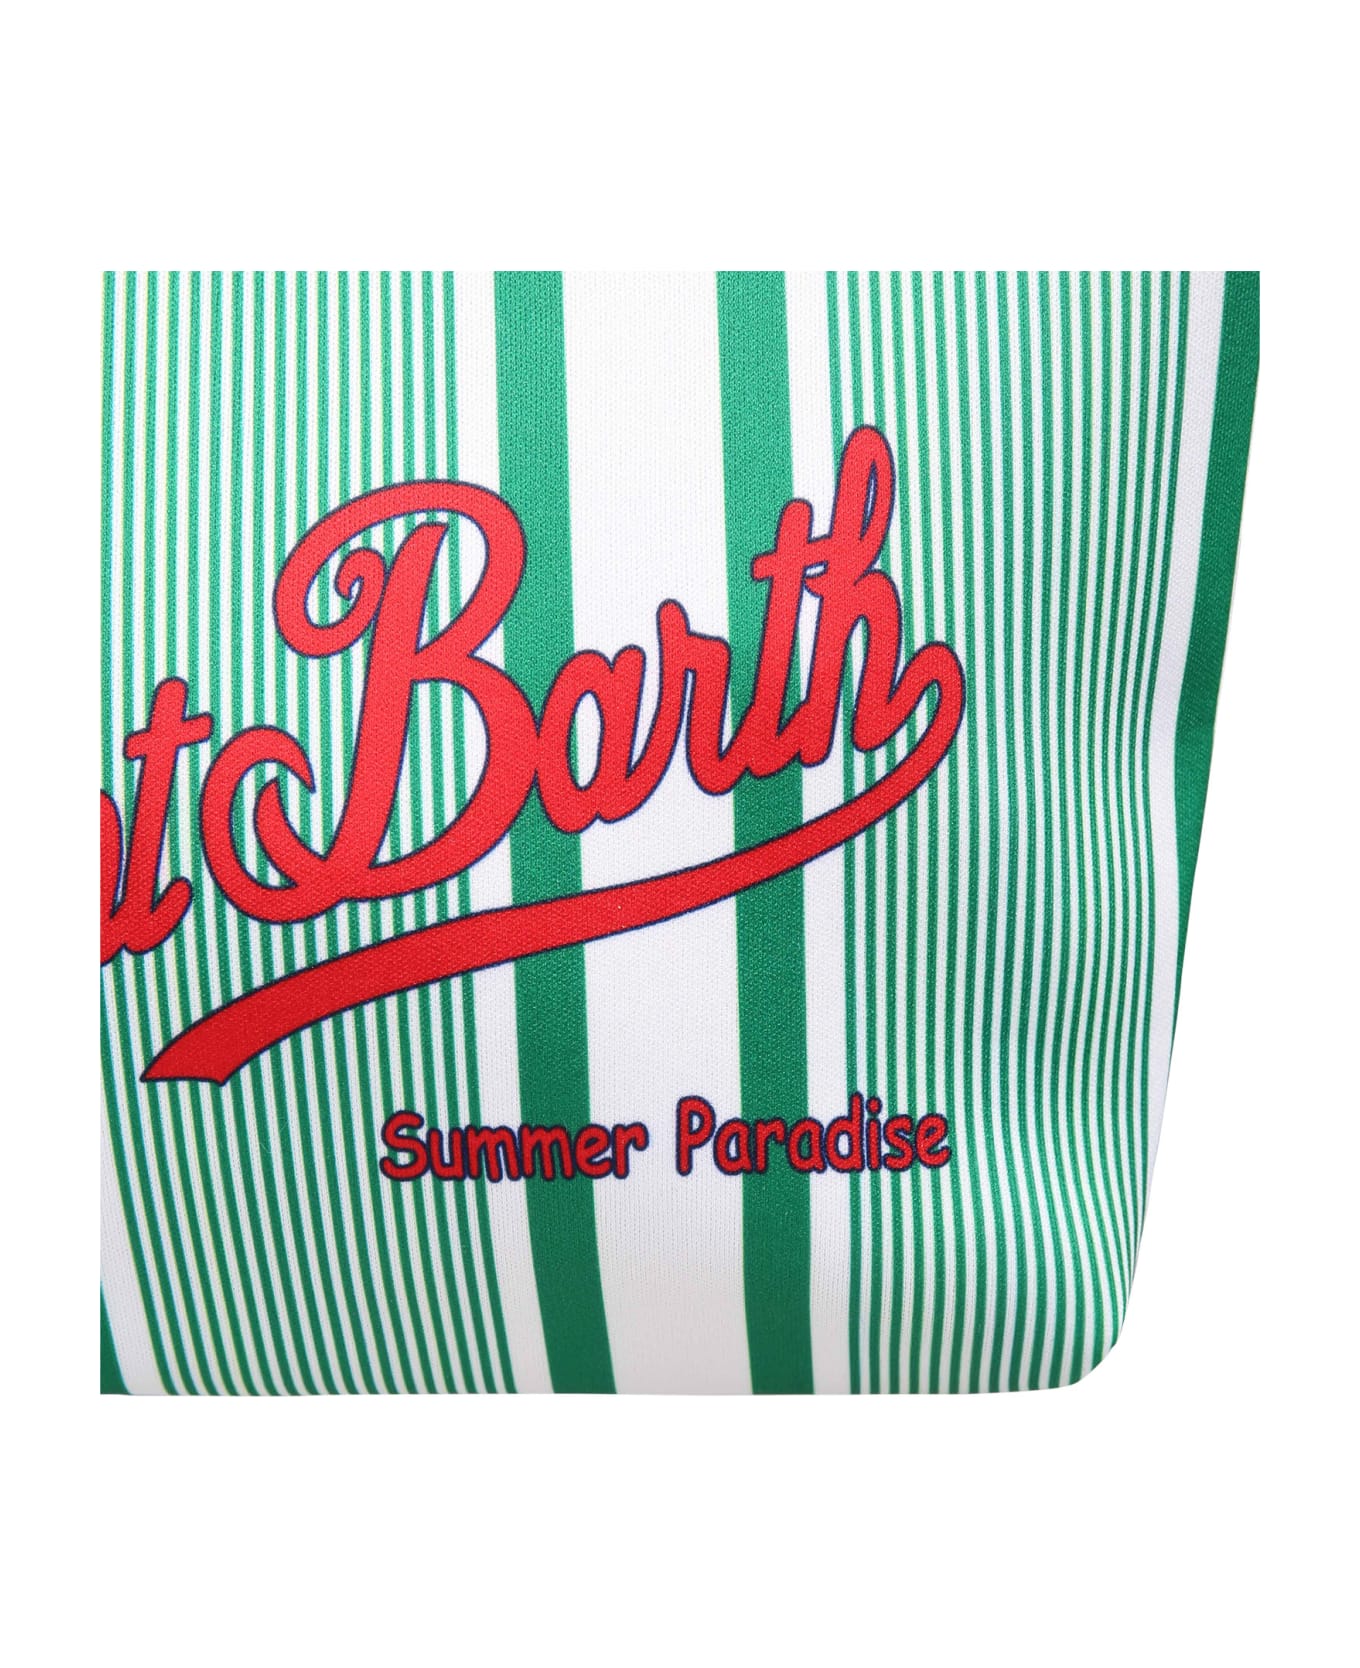 MC2 Saint Barth Green Clutch Bag For Kids With Logo - Green アクセサリー＆ギフト